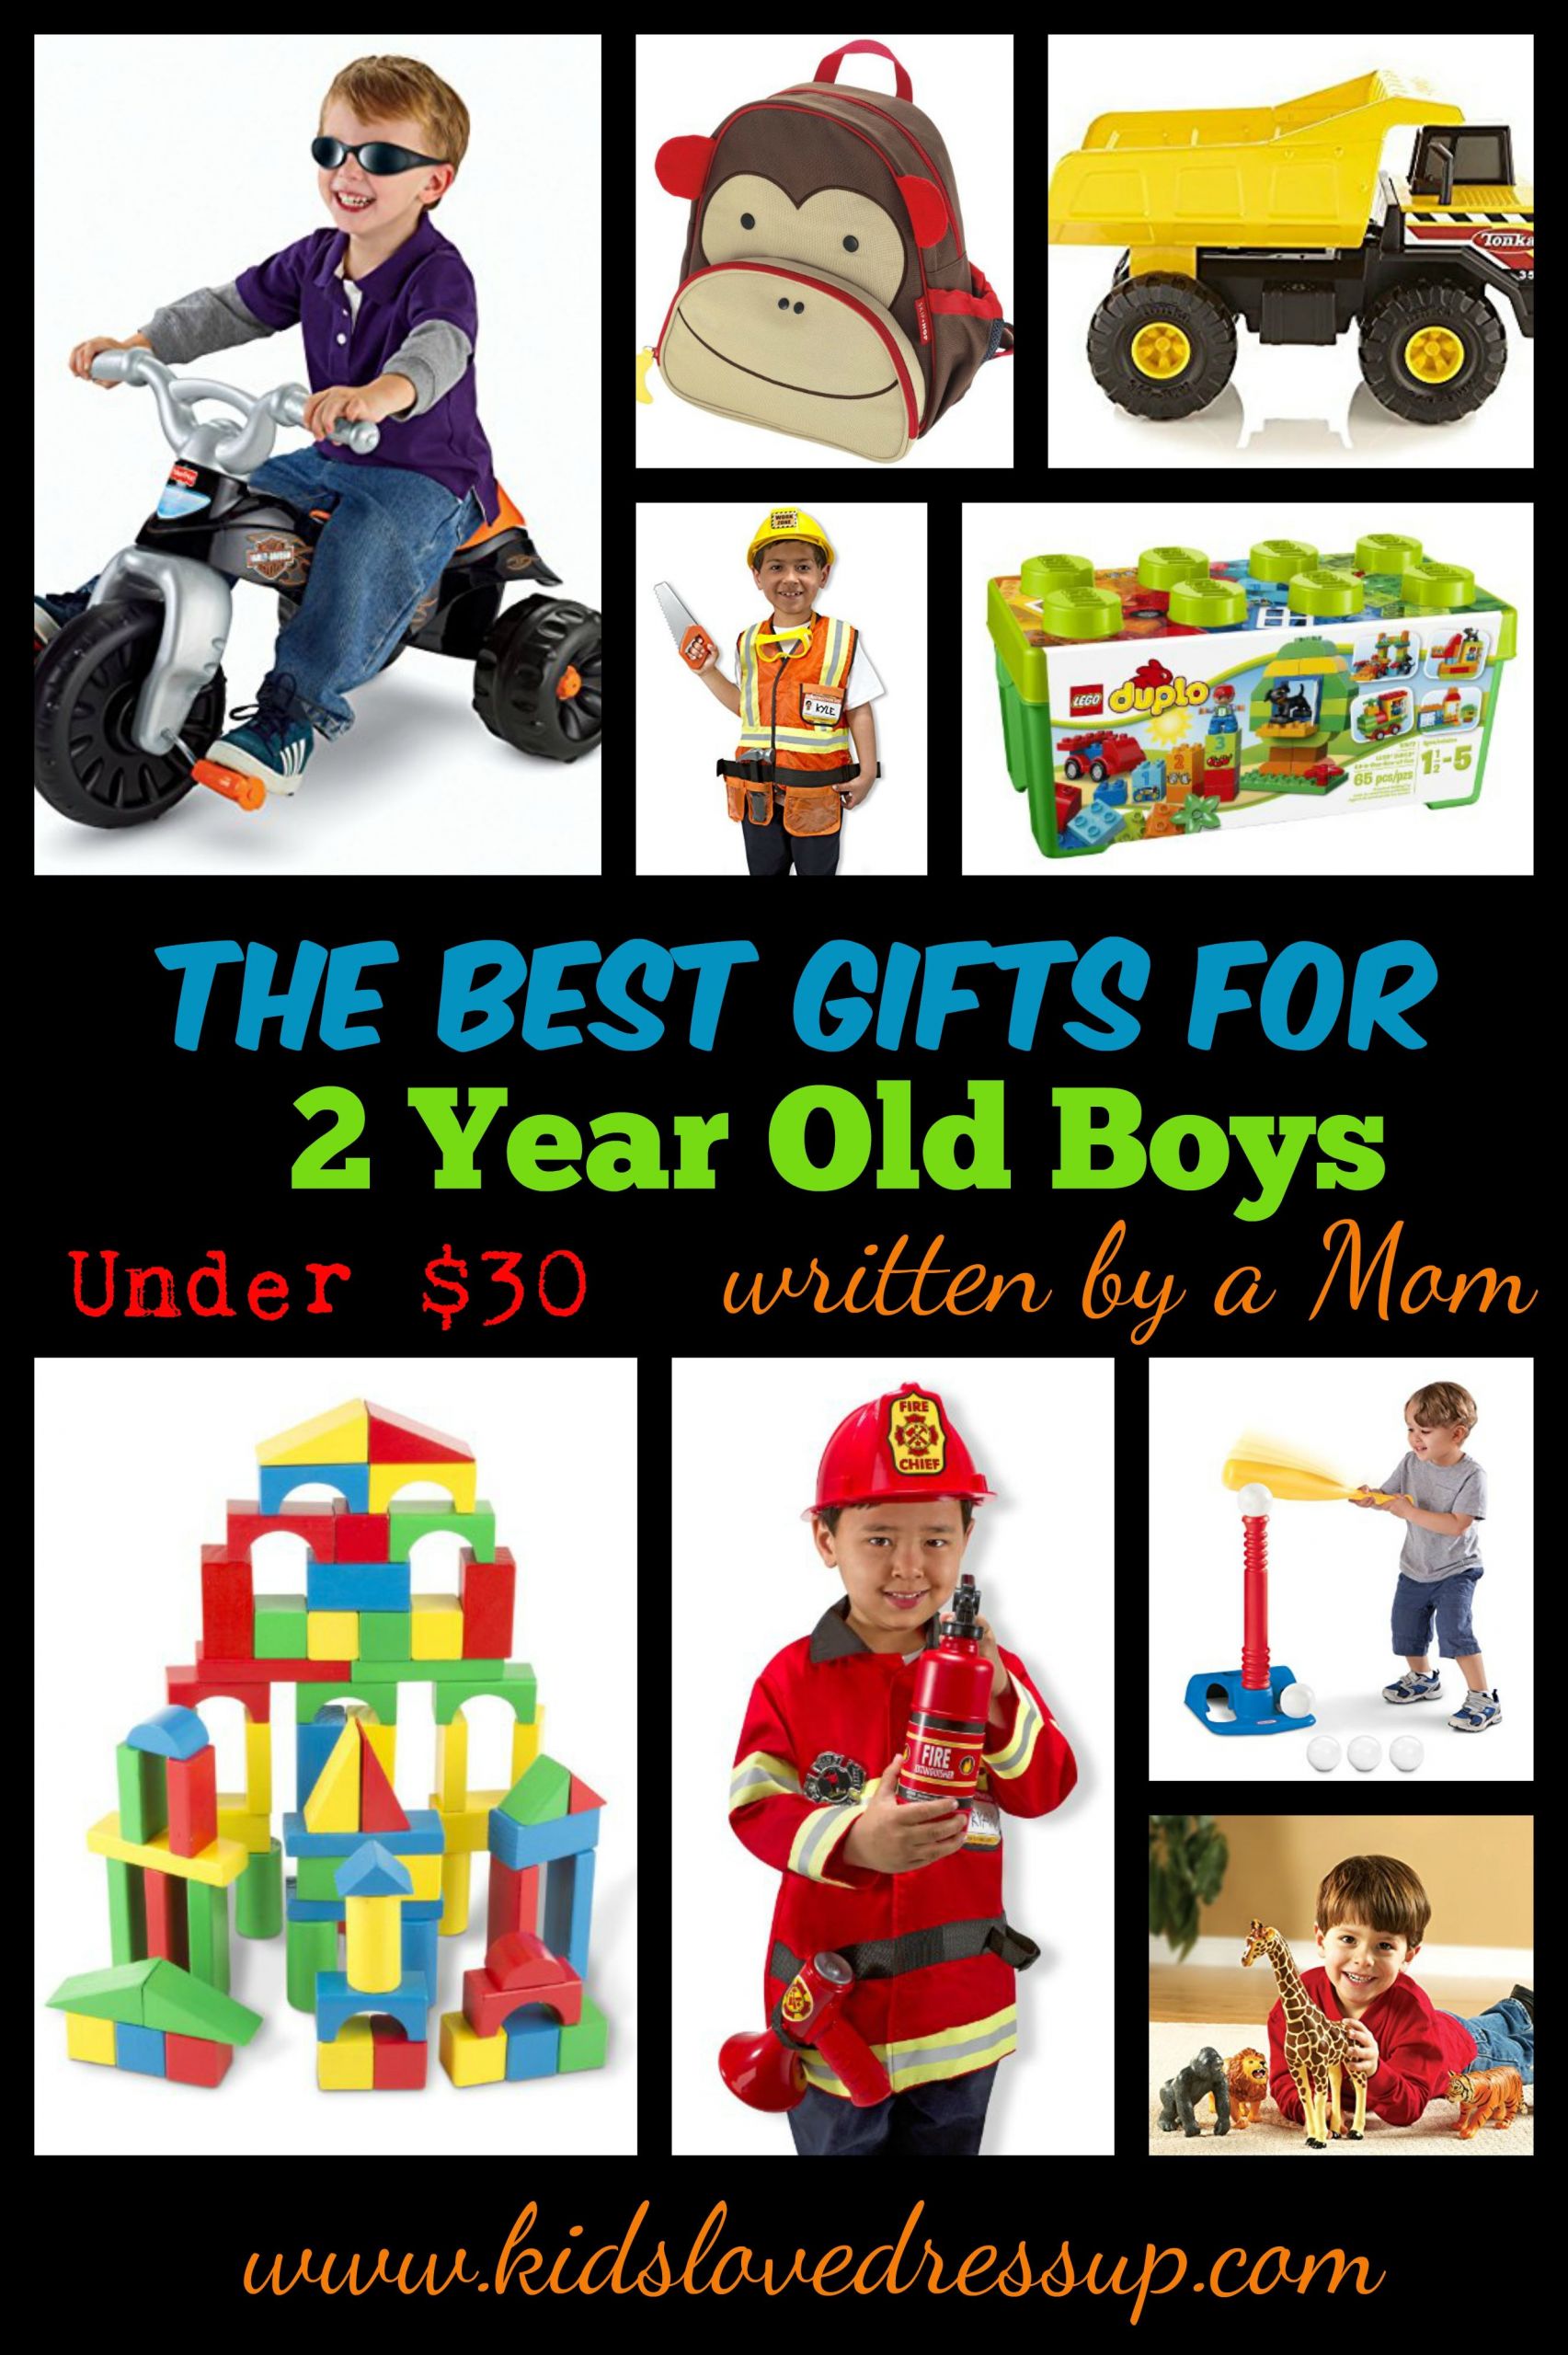 Valentine Gift Ideas For 2 Year Old Boy
 Want to give the favorite t this year Gifts for 2 year